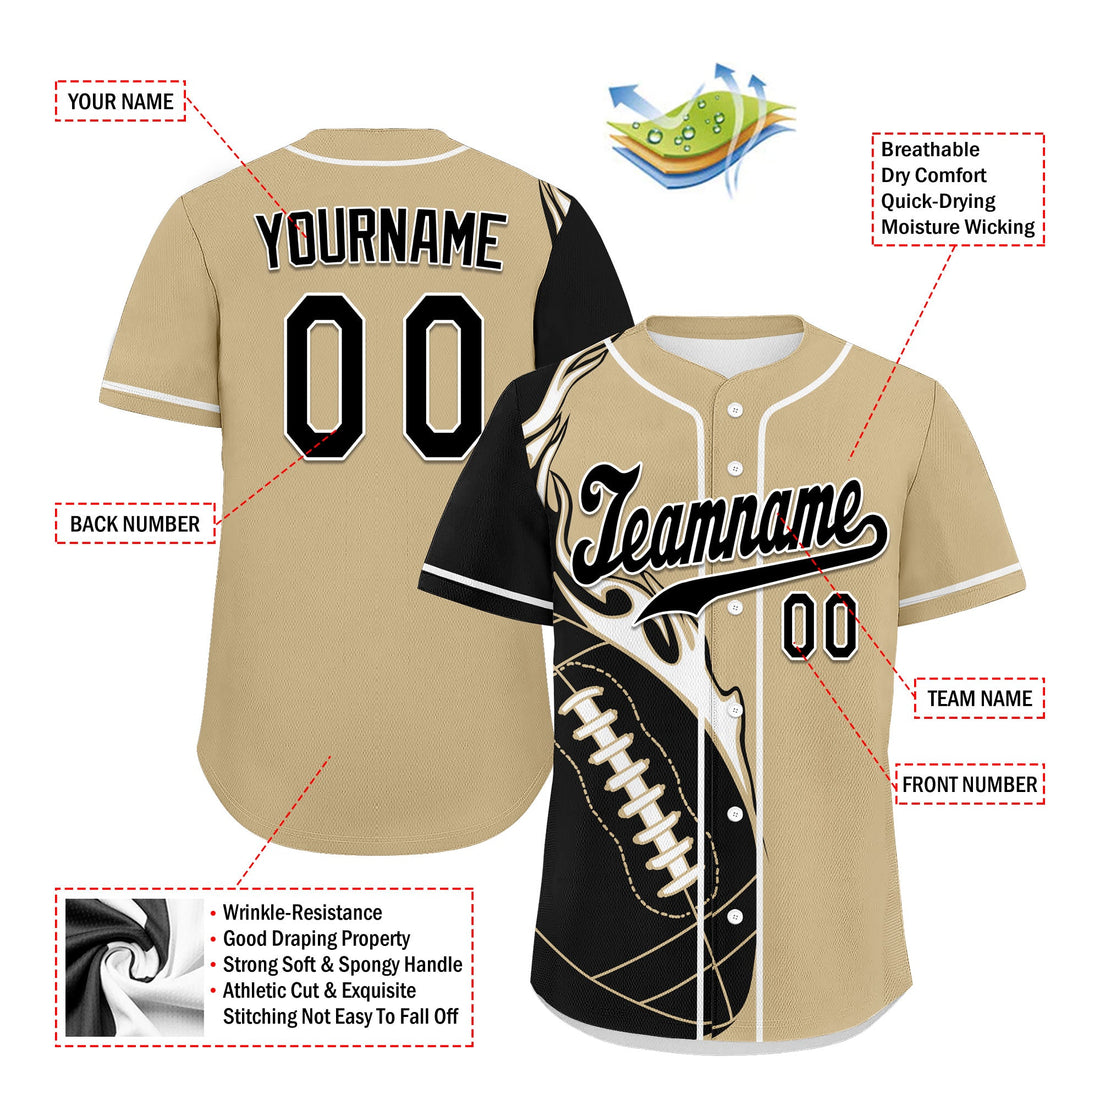 Custom Yellow Black Classic Style Personalized Authentic Baseball Jersey UN002-D0b0a00-a8